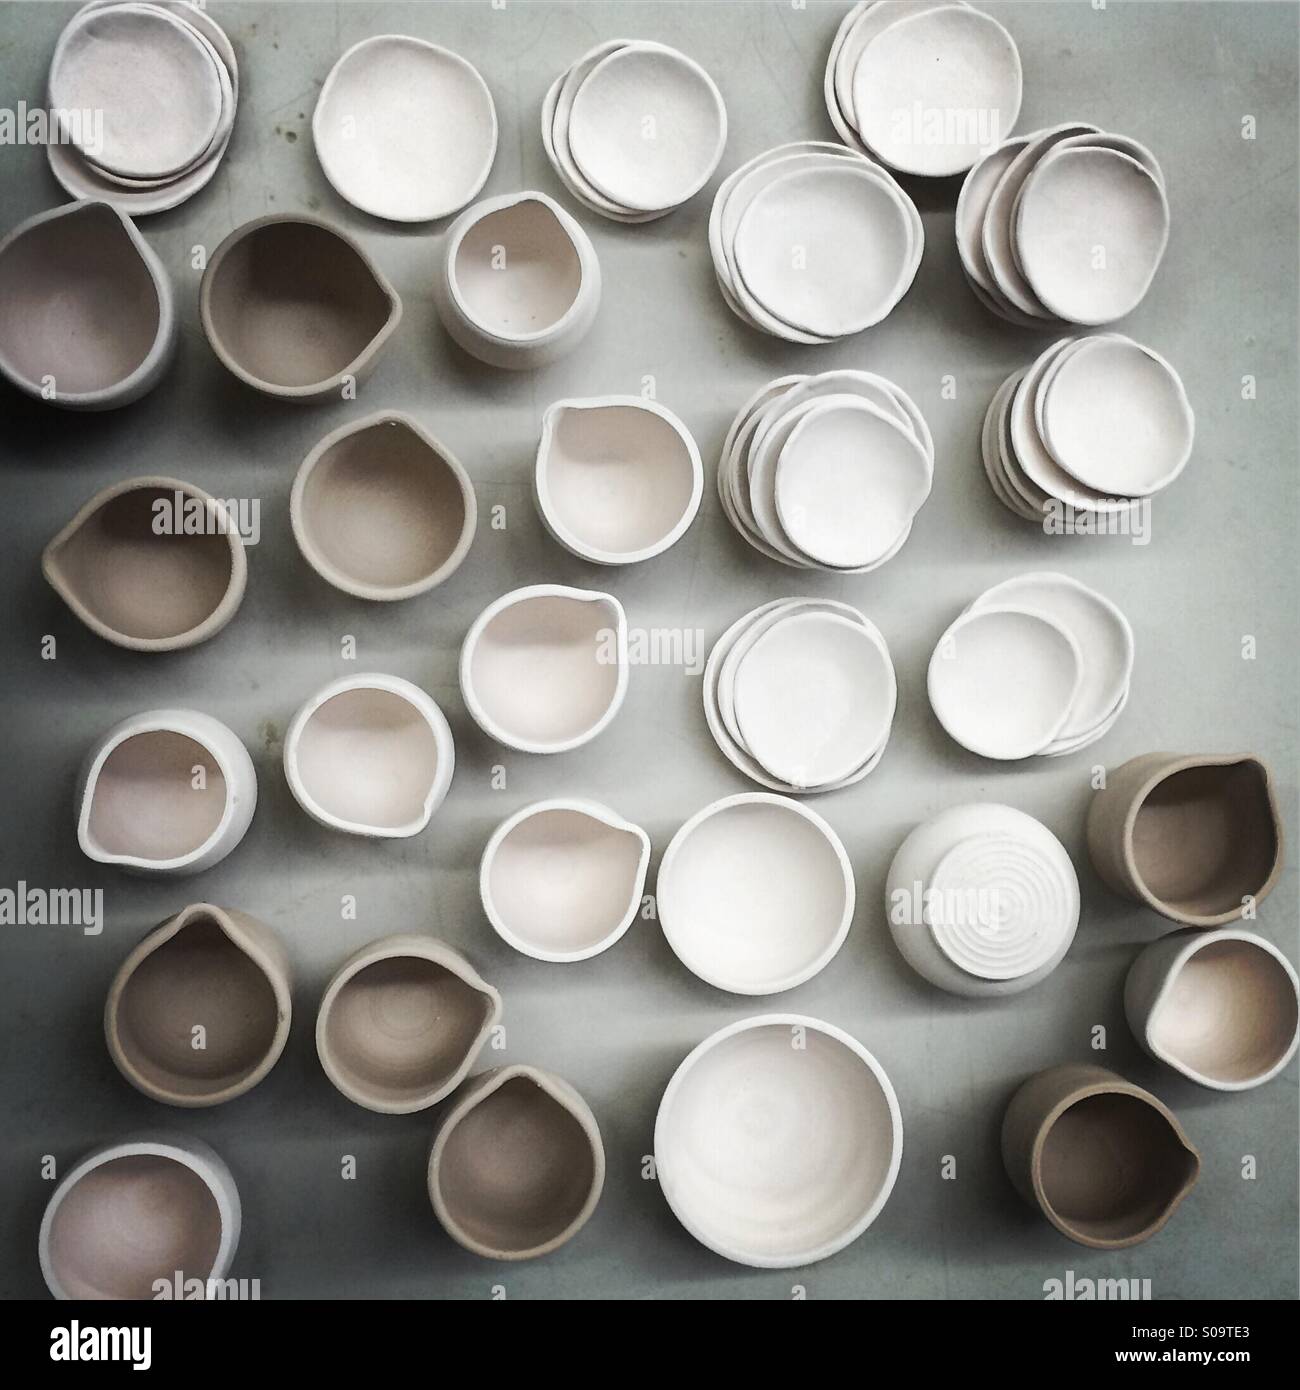 Little pottery bowls and pitchers from overhead Stock Photo